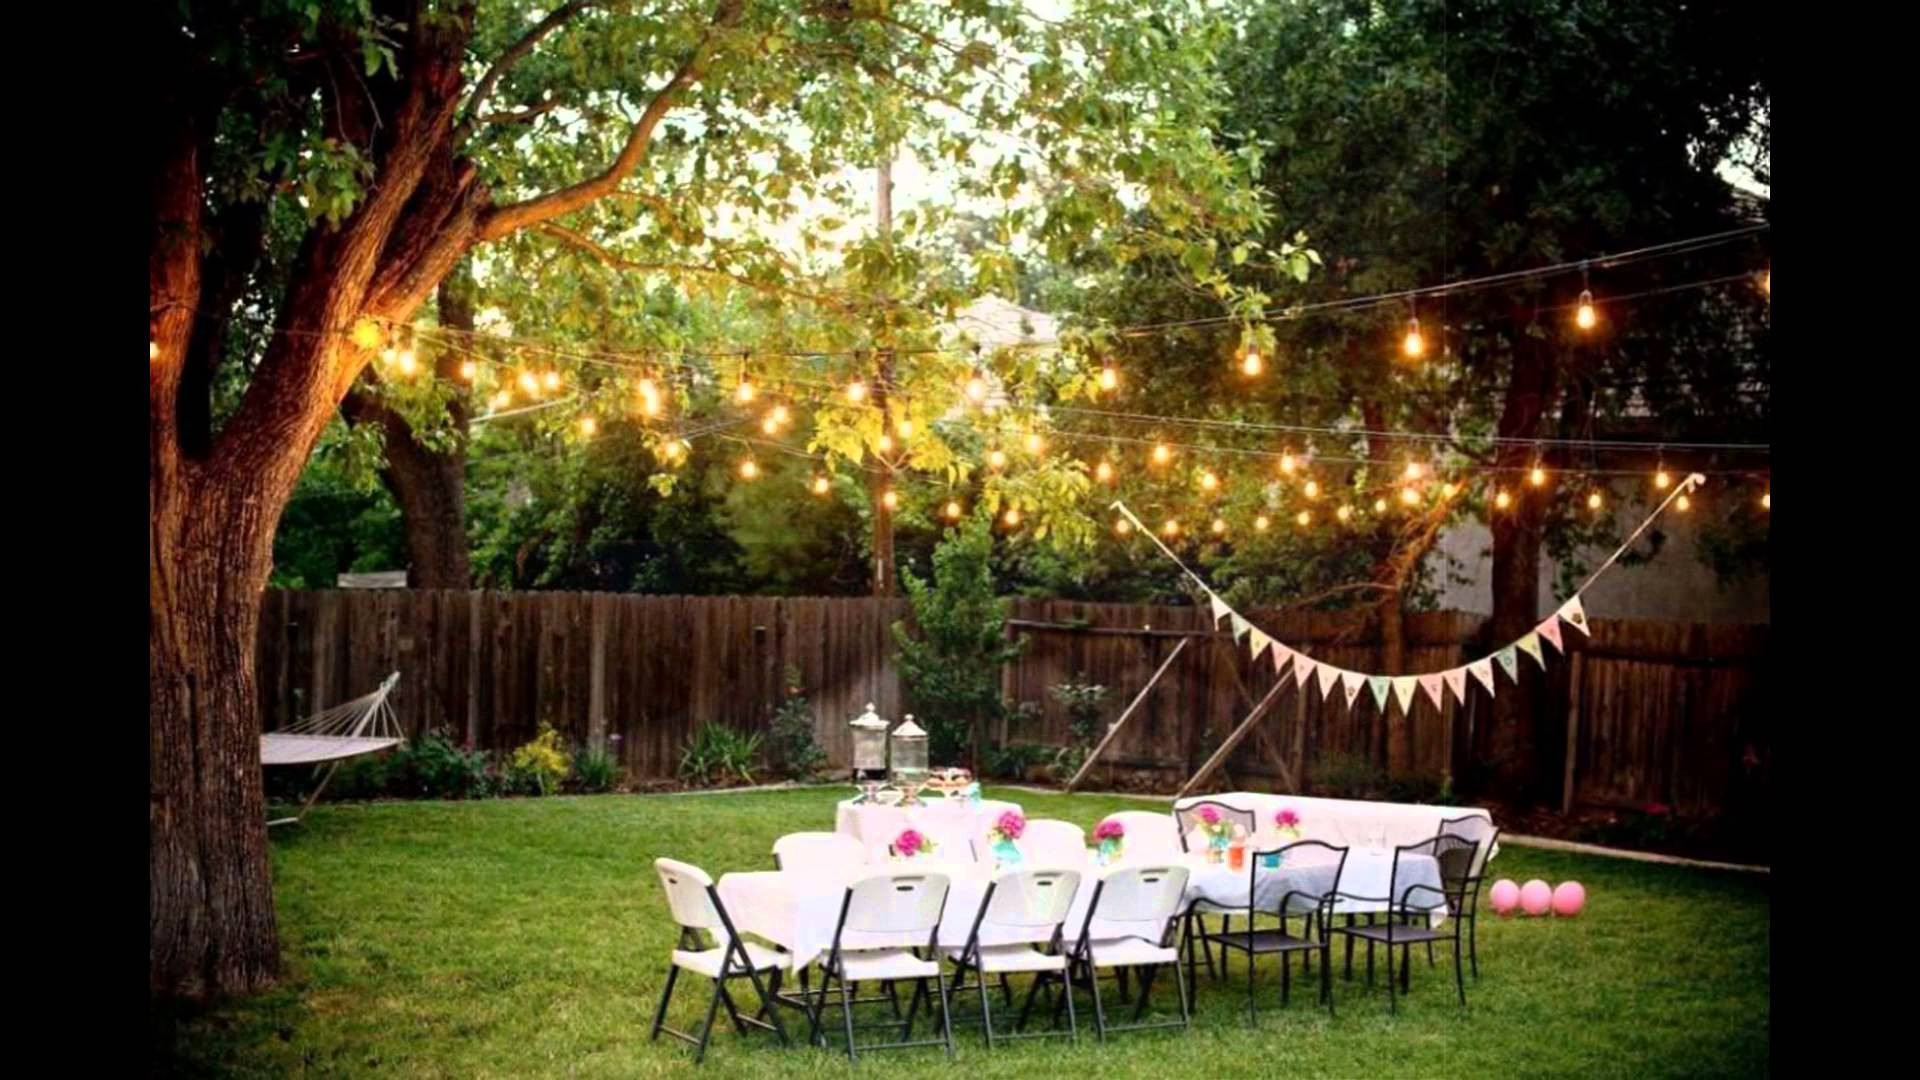 Engagement Party Decorating Ideas On A Budget
 Wedding Trends Archives Chicago Wedding Blog